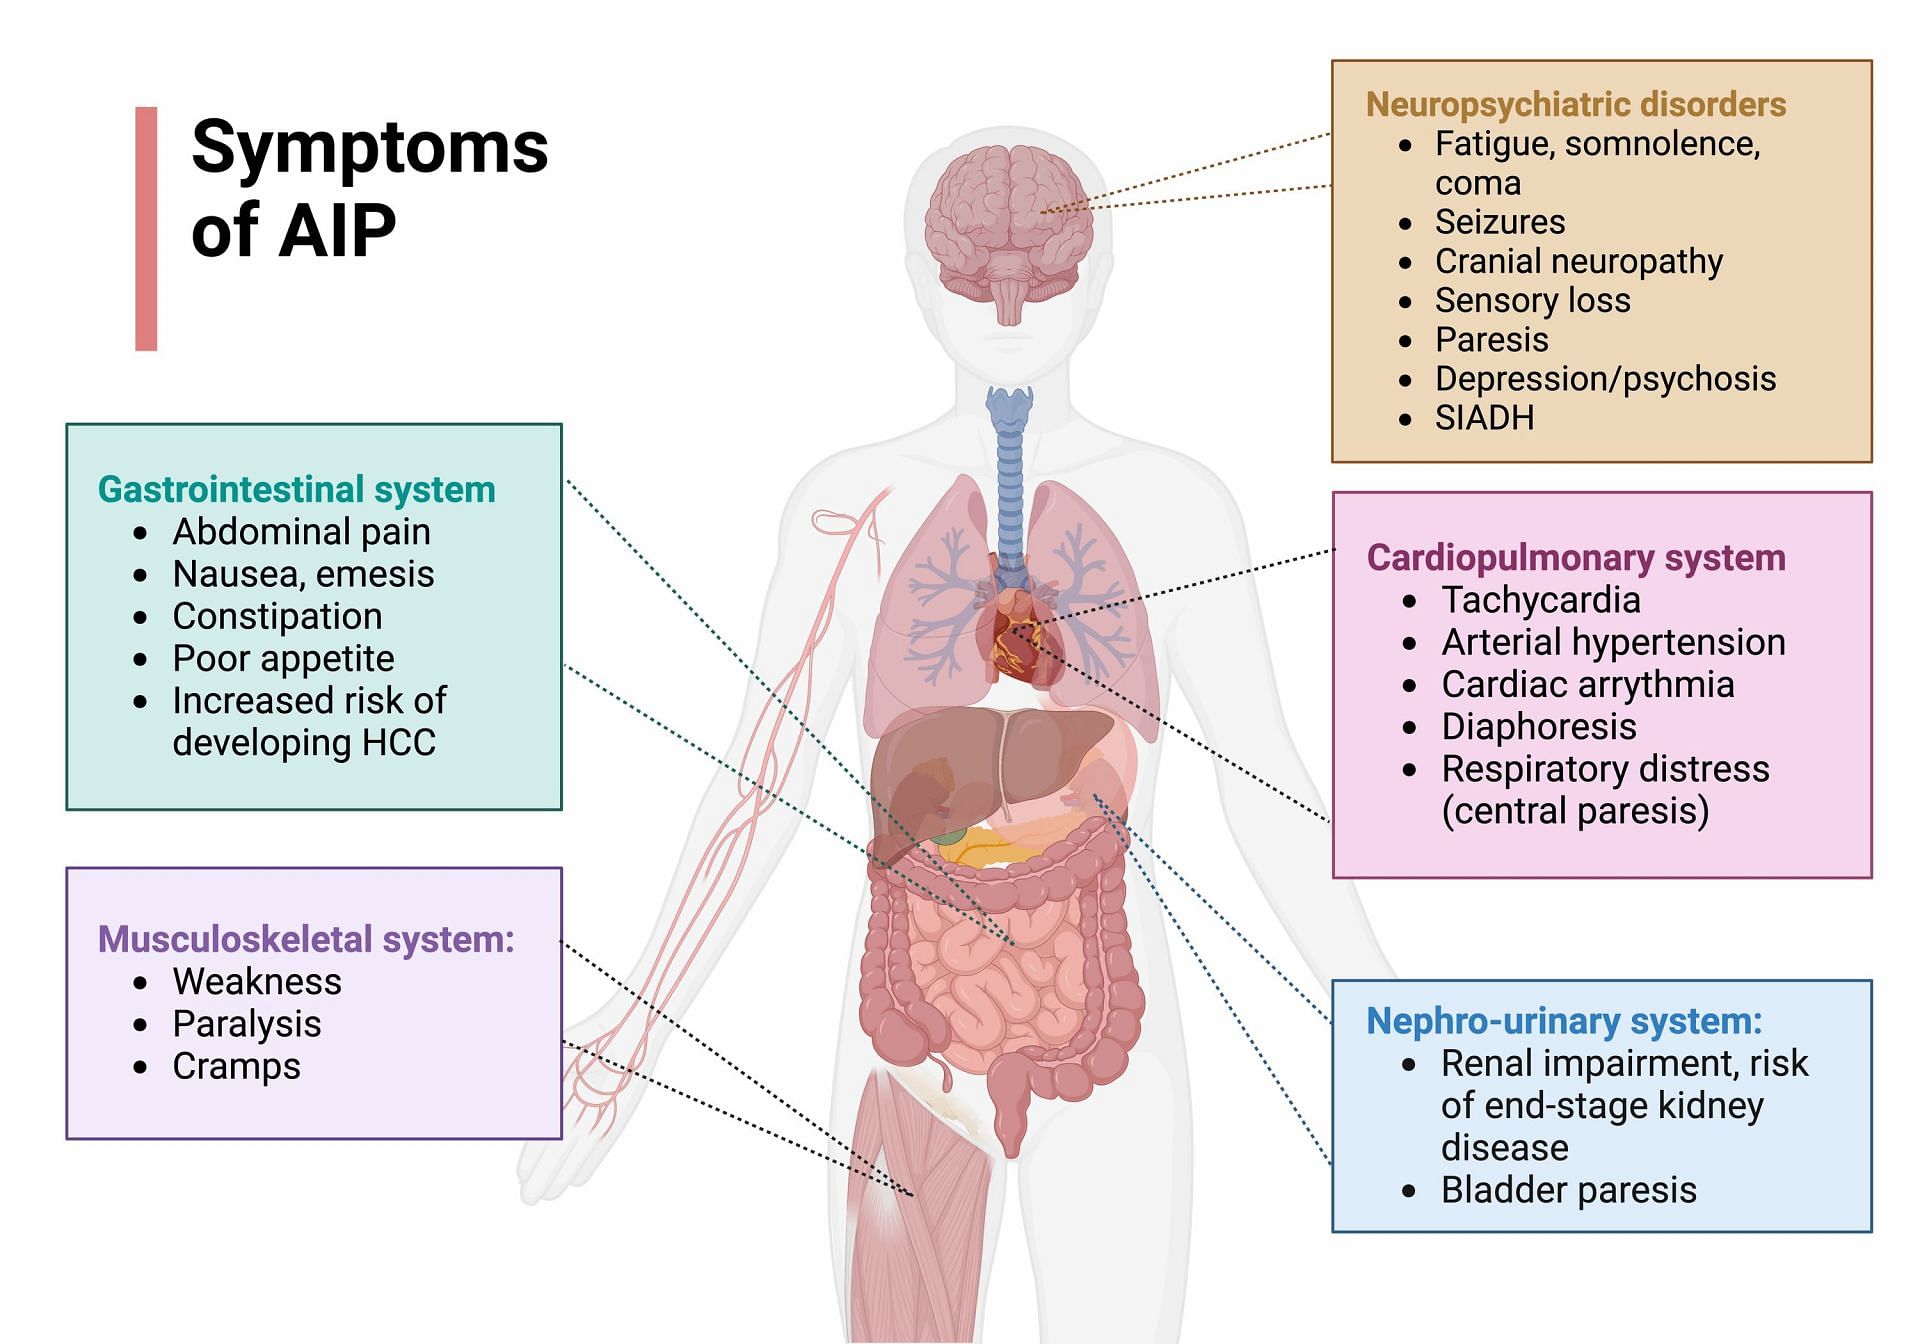 AIP is the most common and the one associated to psychiatric symptoms. (Image via Lightbox/ Lightbox)